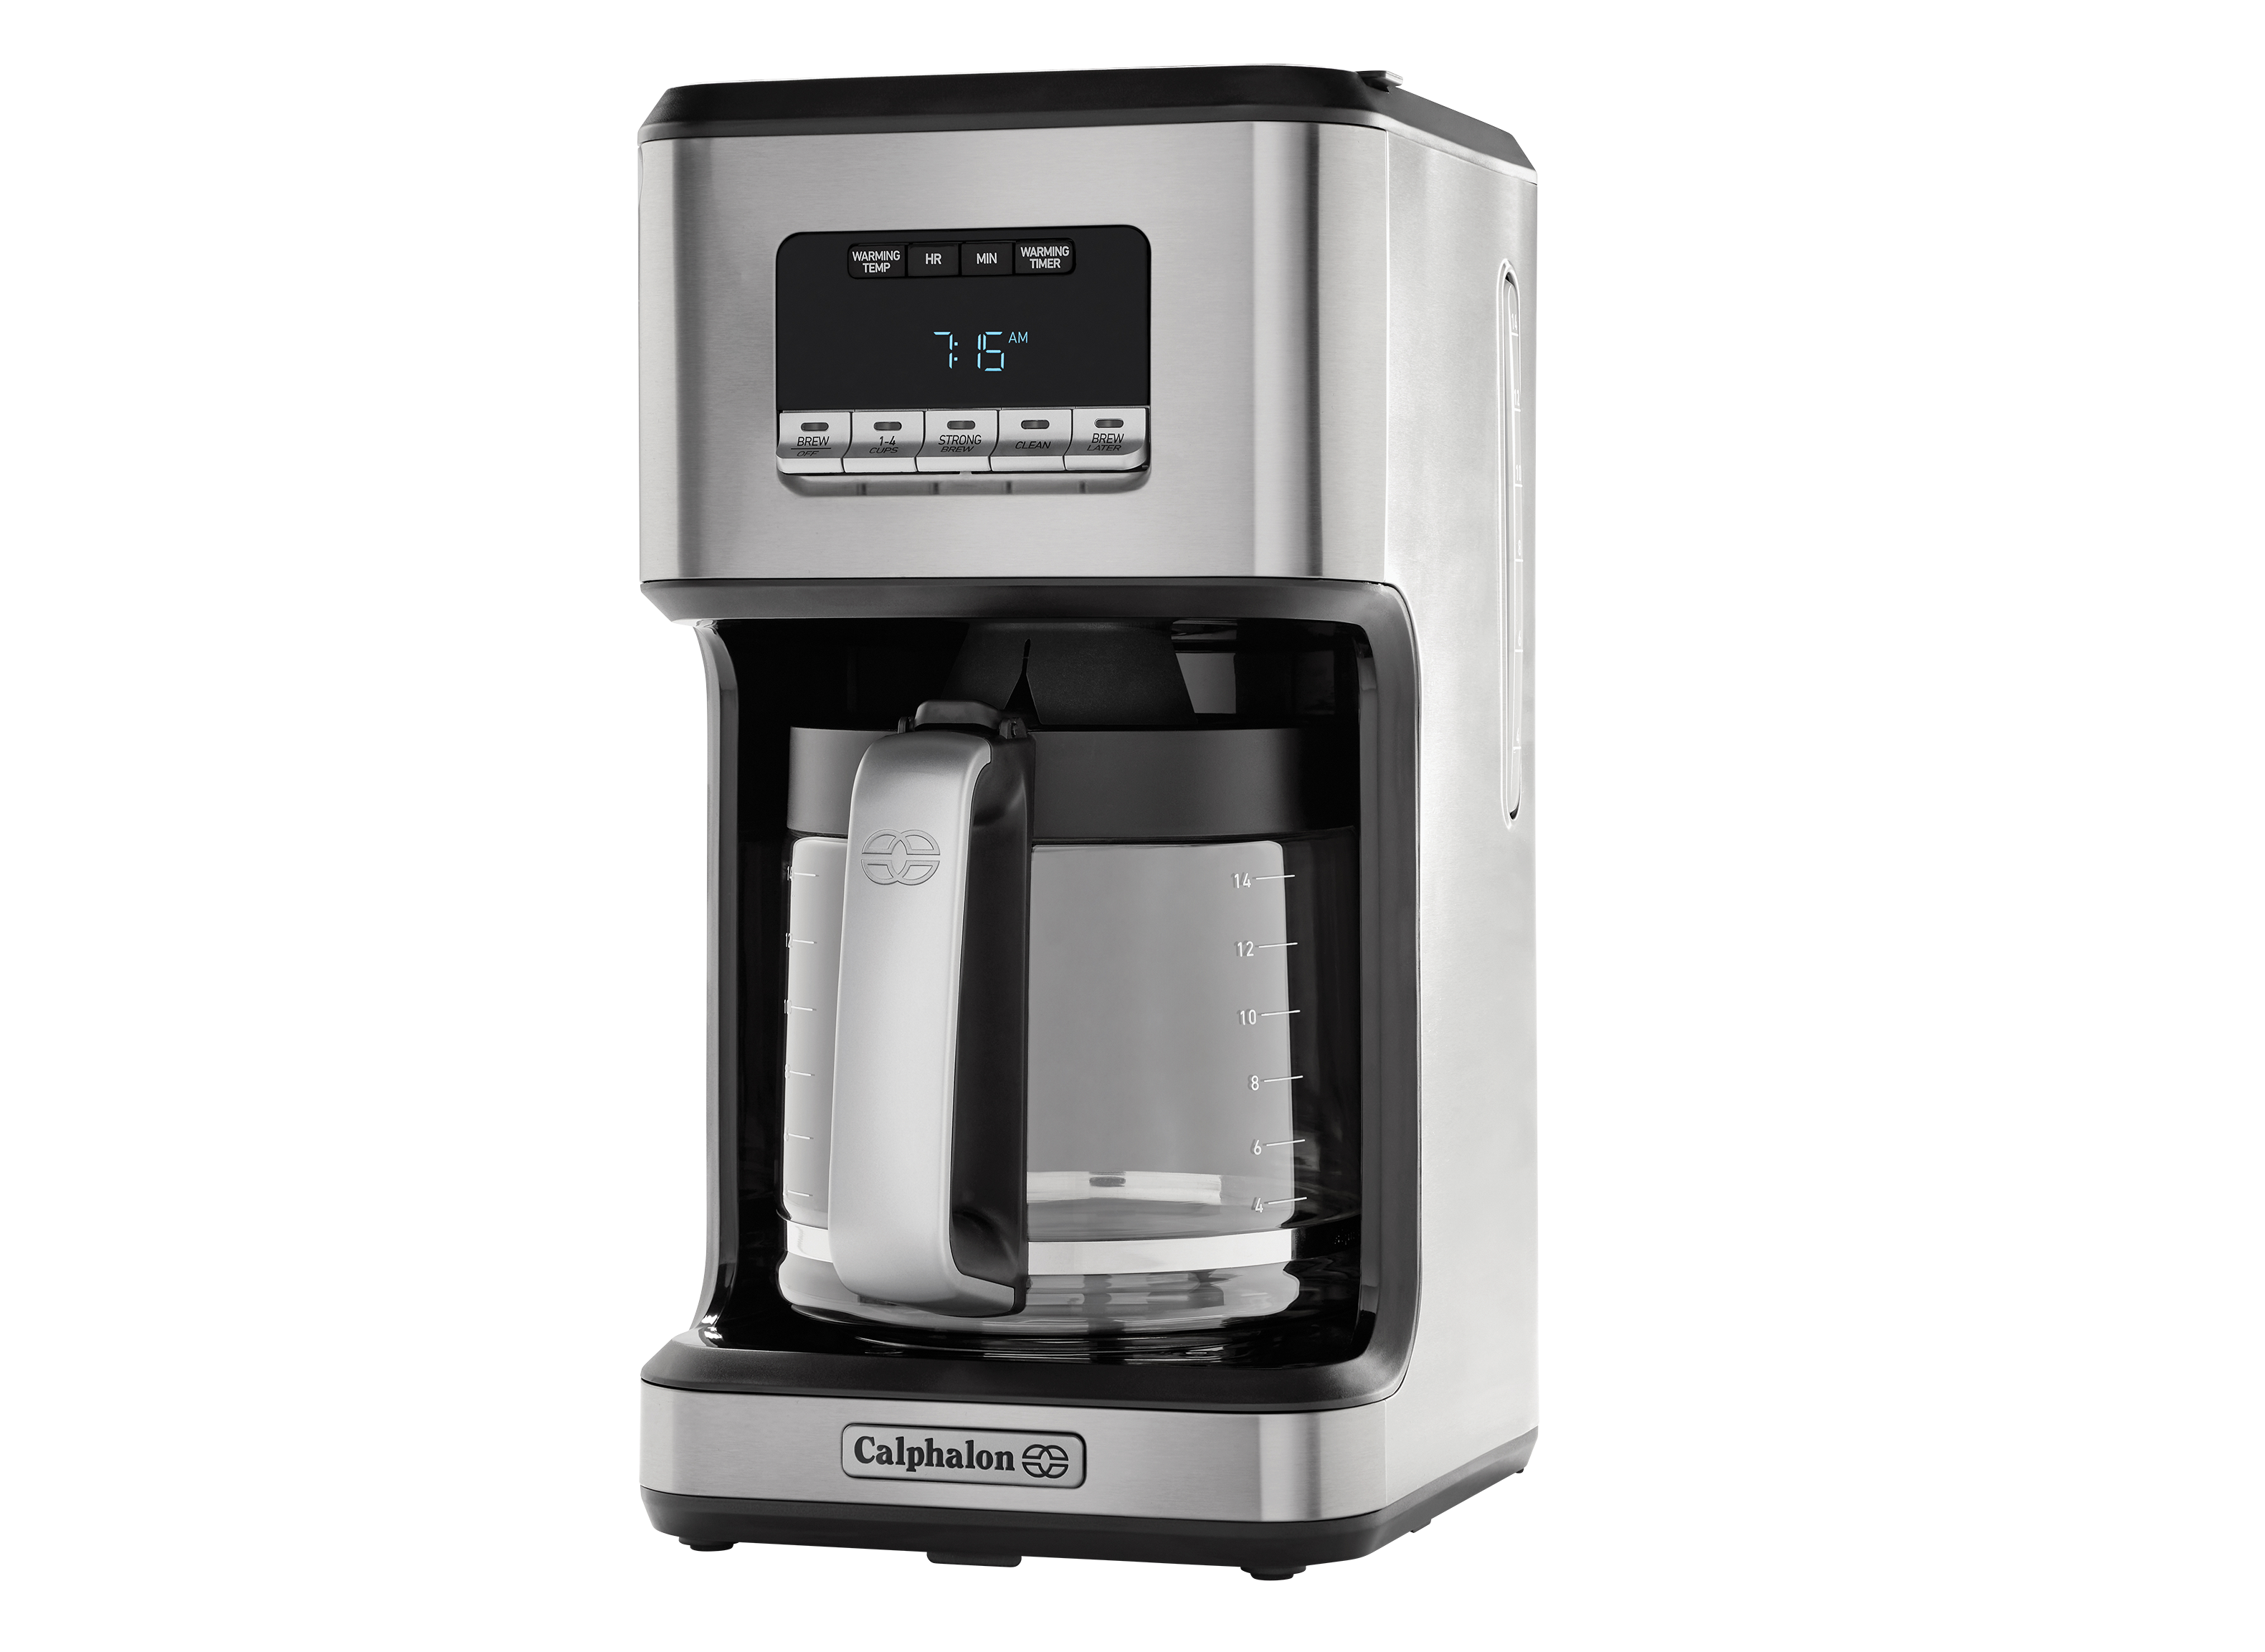 Calphalon 14 Cup Programmable Coffee Maker Review - Consumer Reports